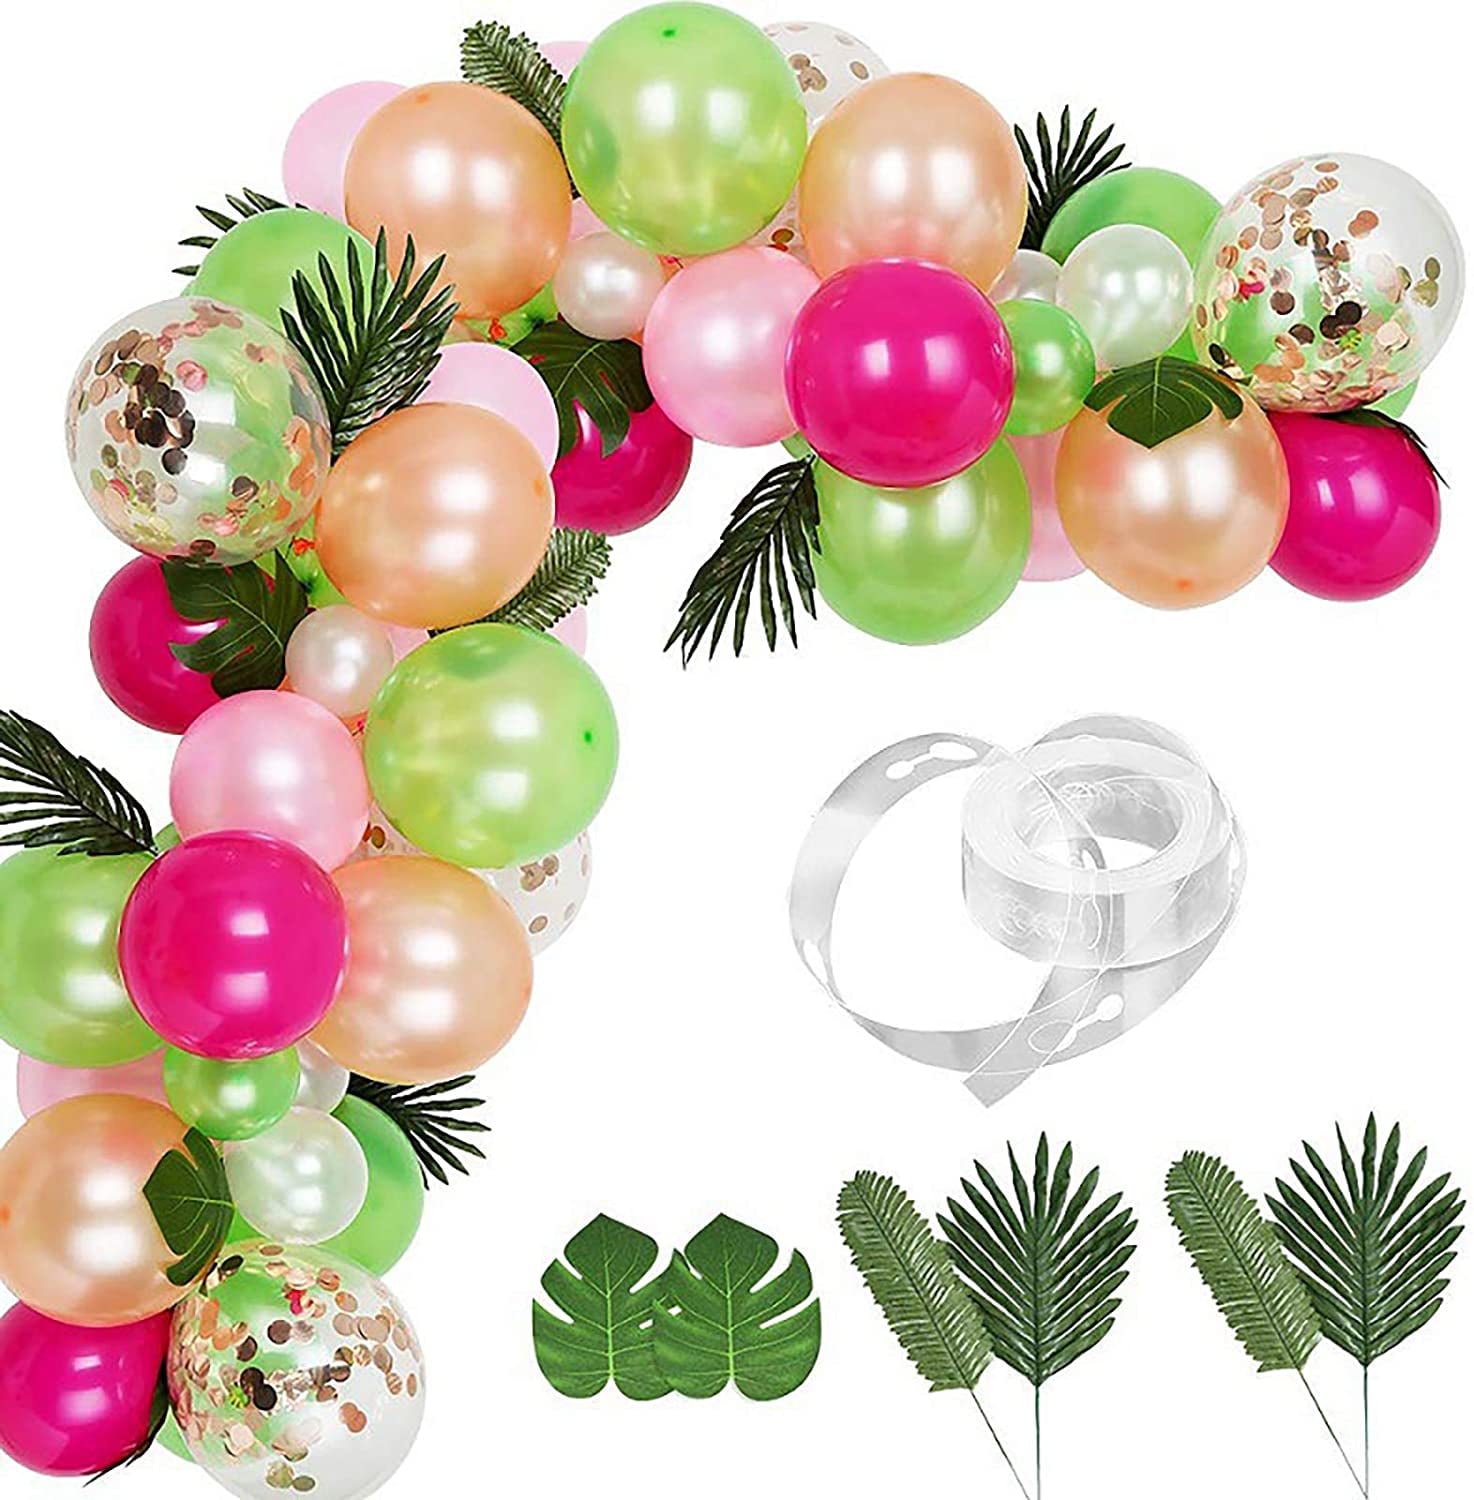 Balloon Arch Garland Kit 90 Piece Dinosaur Balloons with 16 ft Balloon Strip and